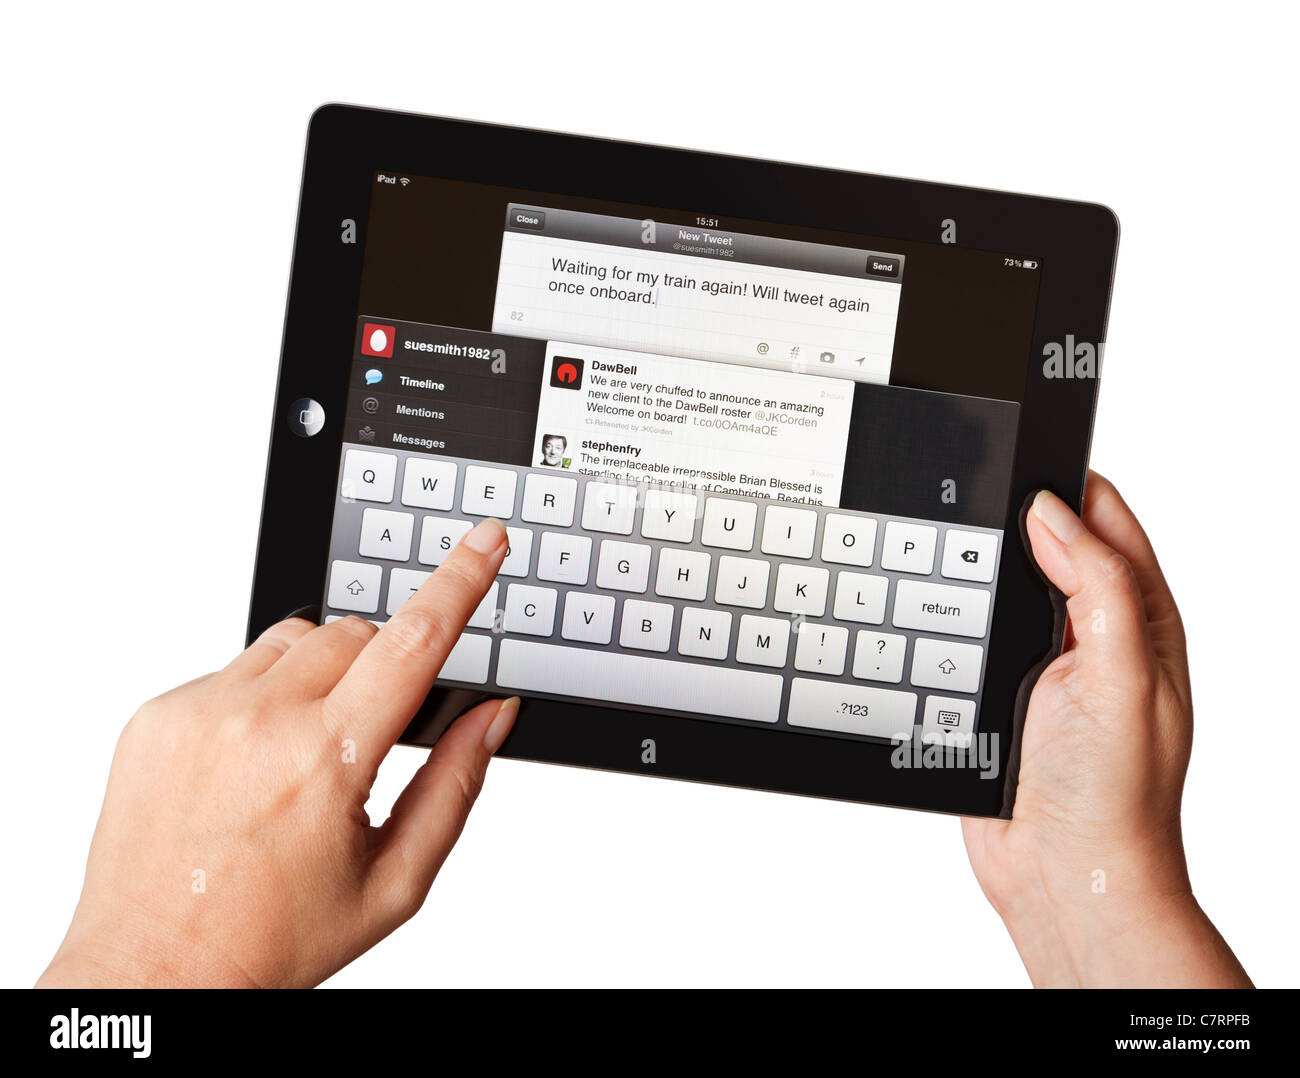 Female hands using iPad writing a tweet on a mobile Twitter application Stock Photo